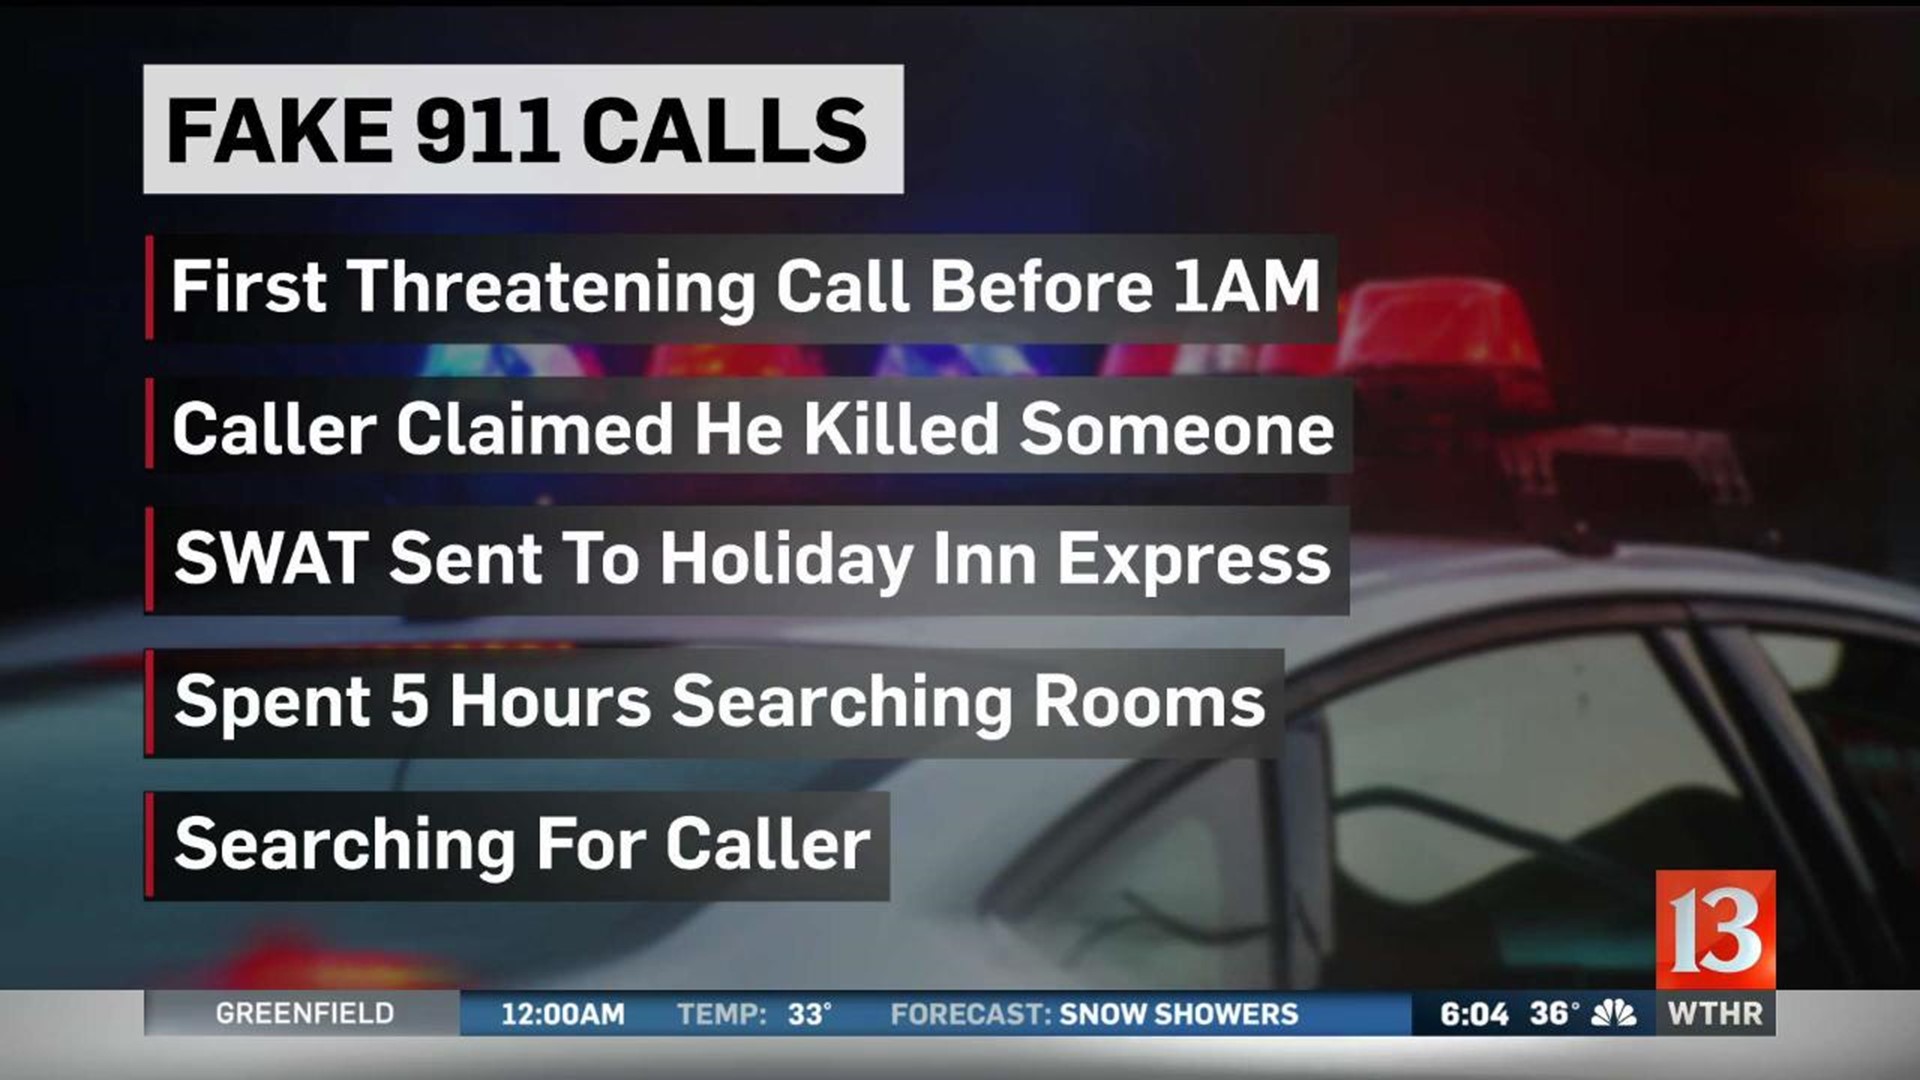 Police searching for person who made fake 911 calls